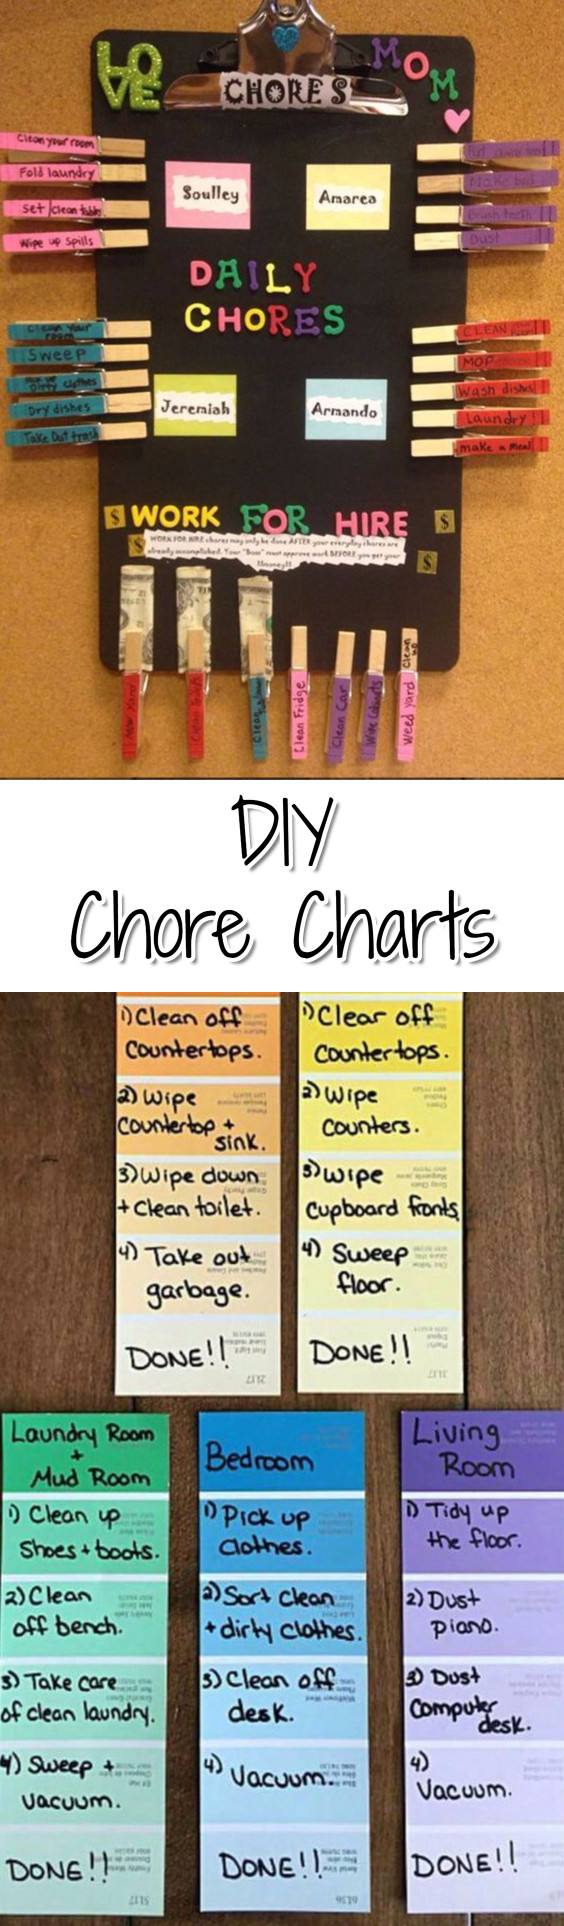 Chore Charts!  Lots of DIY chore chart ideas for your kids